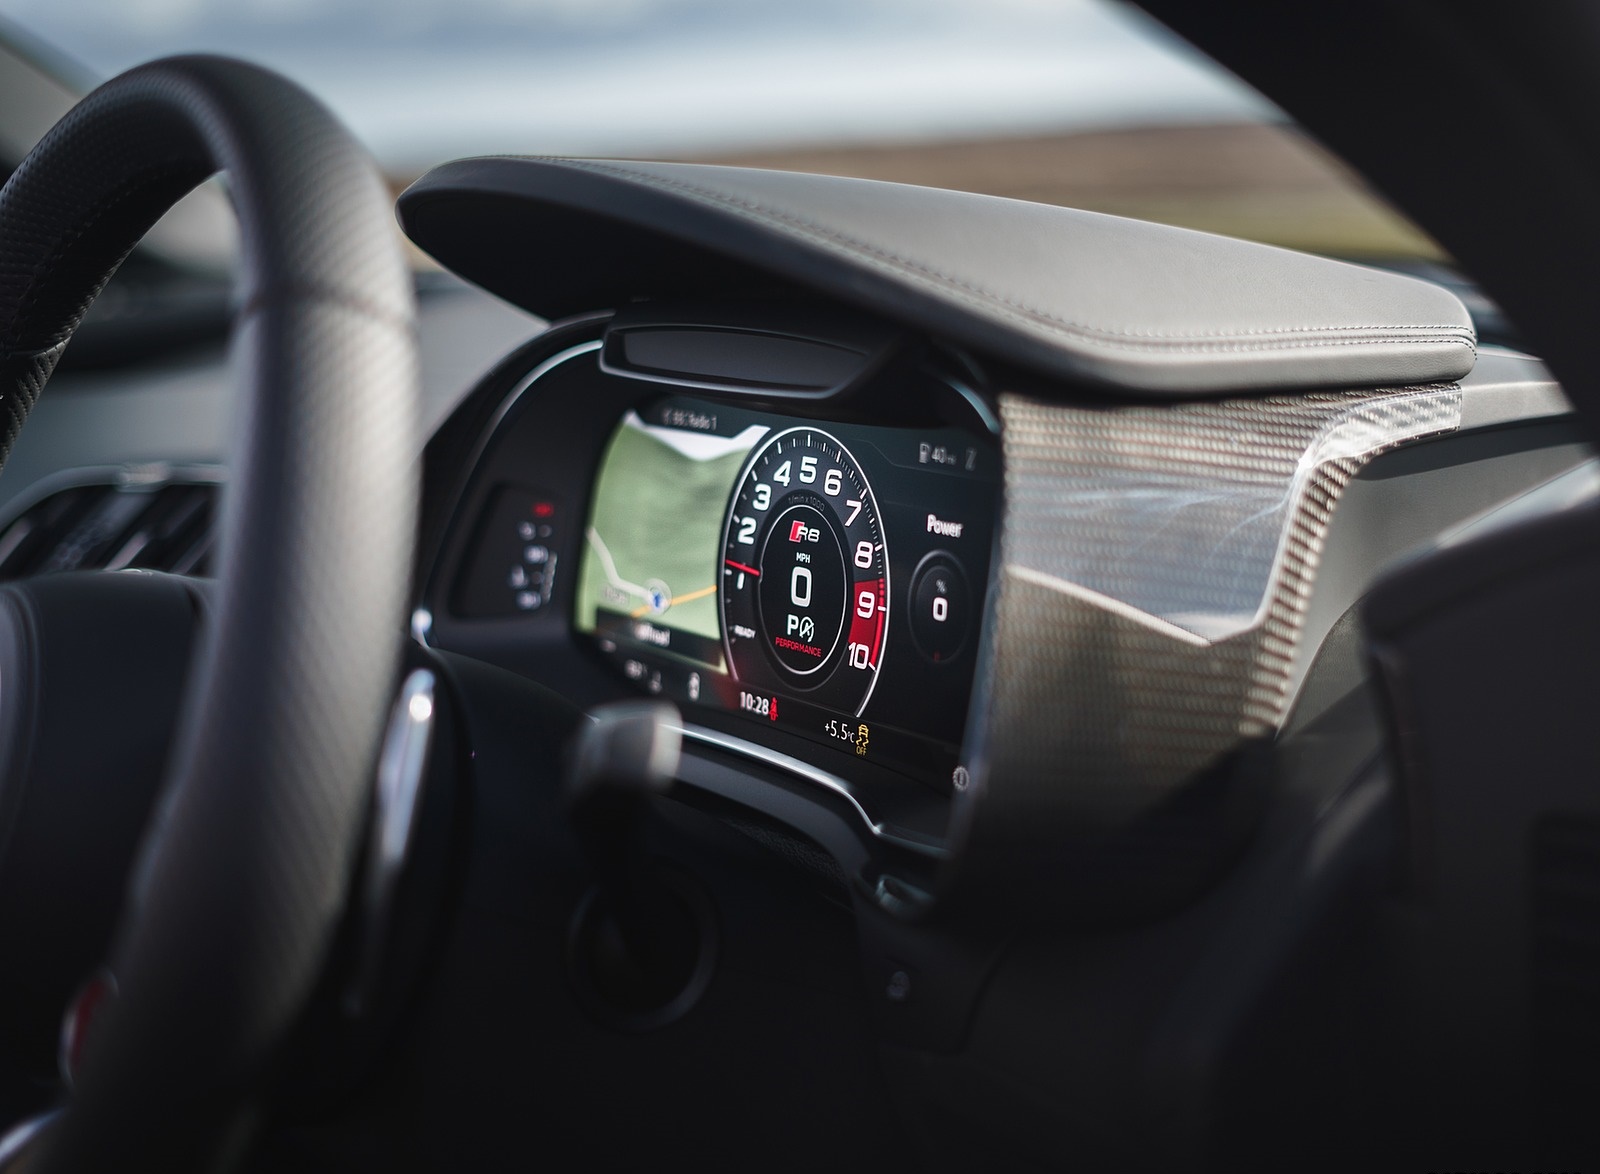 2019 Audi R8 V10 Coupe Performance quattro (UK-Spec) Digital Instrument Cluster Wallpapers #197 of 199